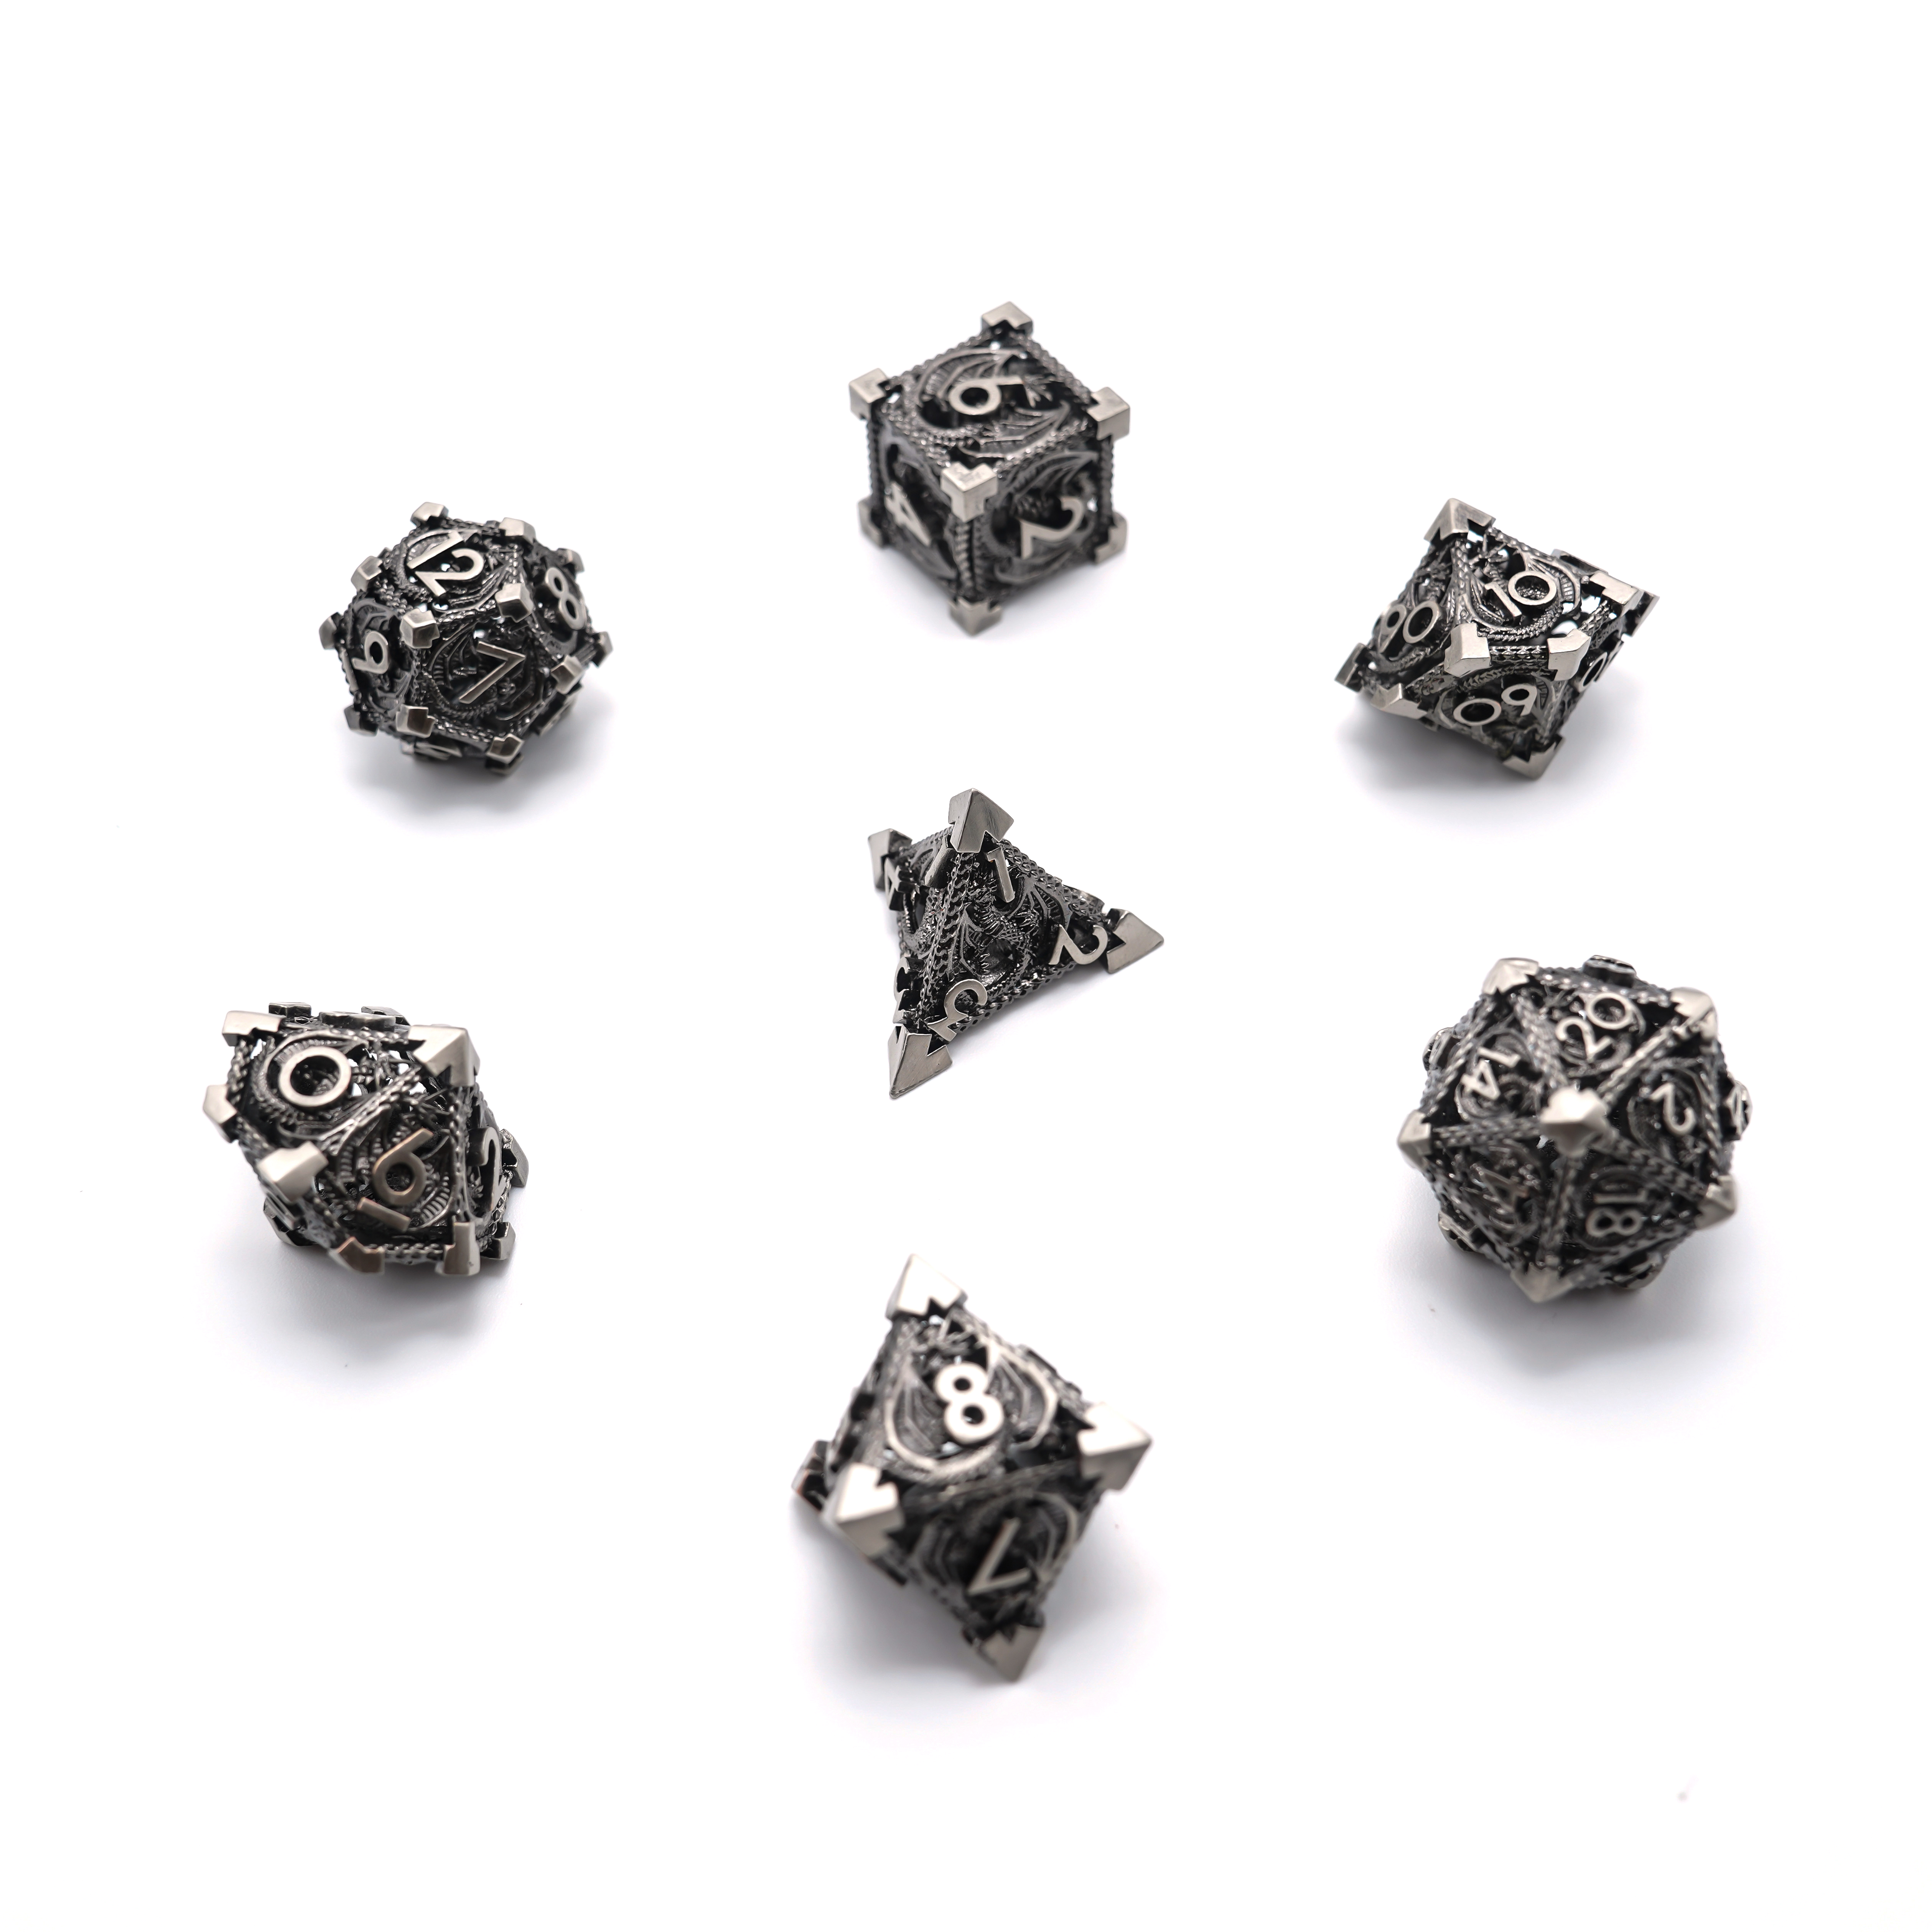 The Healing Dice Encourage Real Life Dungeons & Dragons Heroics